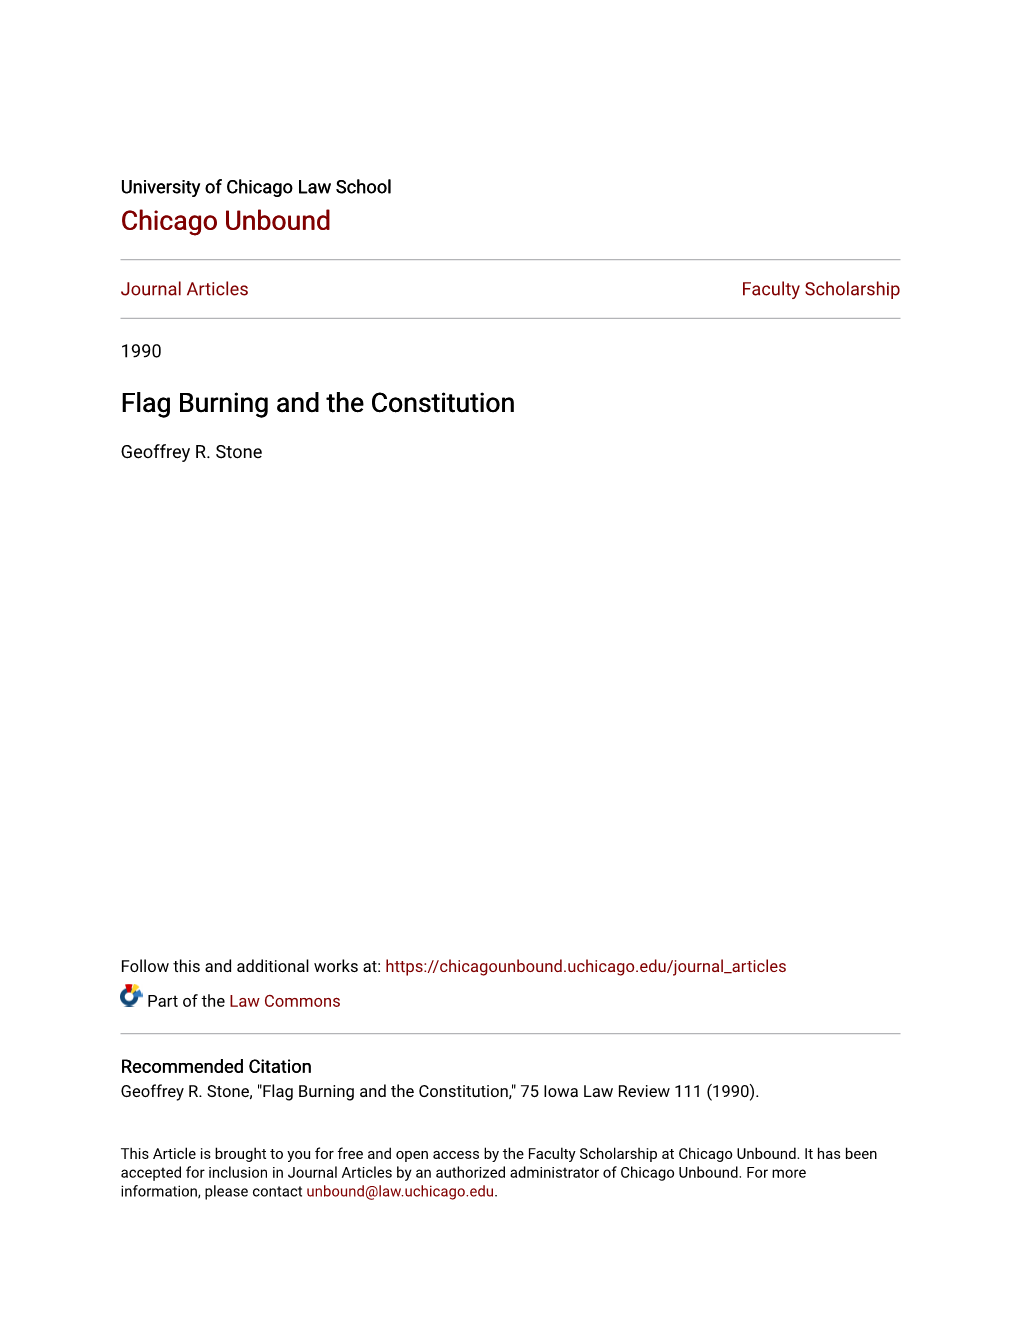 Flag Burning and the Constitution